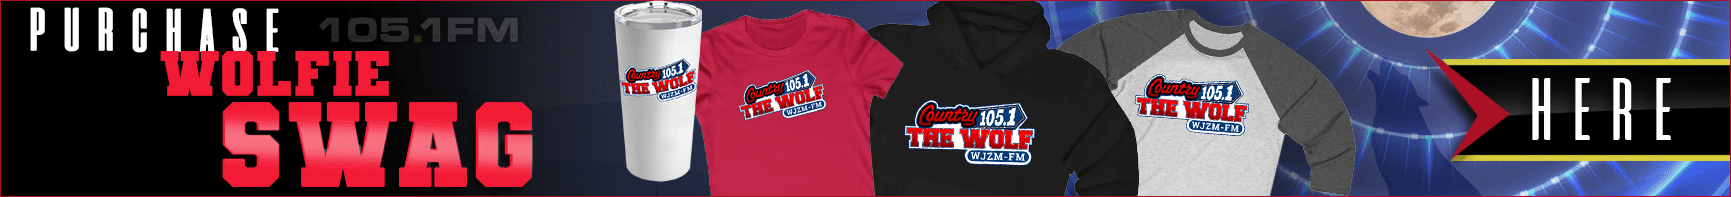 Click Here to Purchase Wolfie Swag | Country 105.1 The Wolf (WJZM)